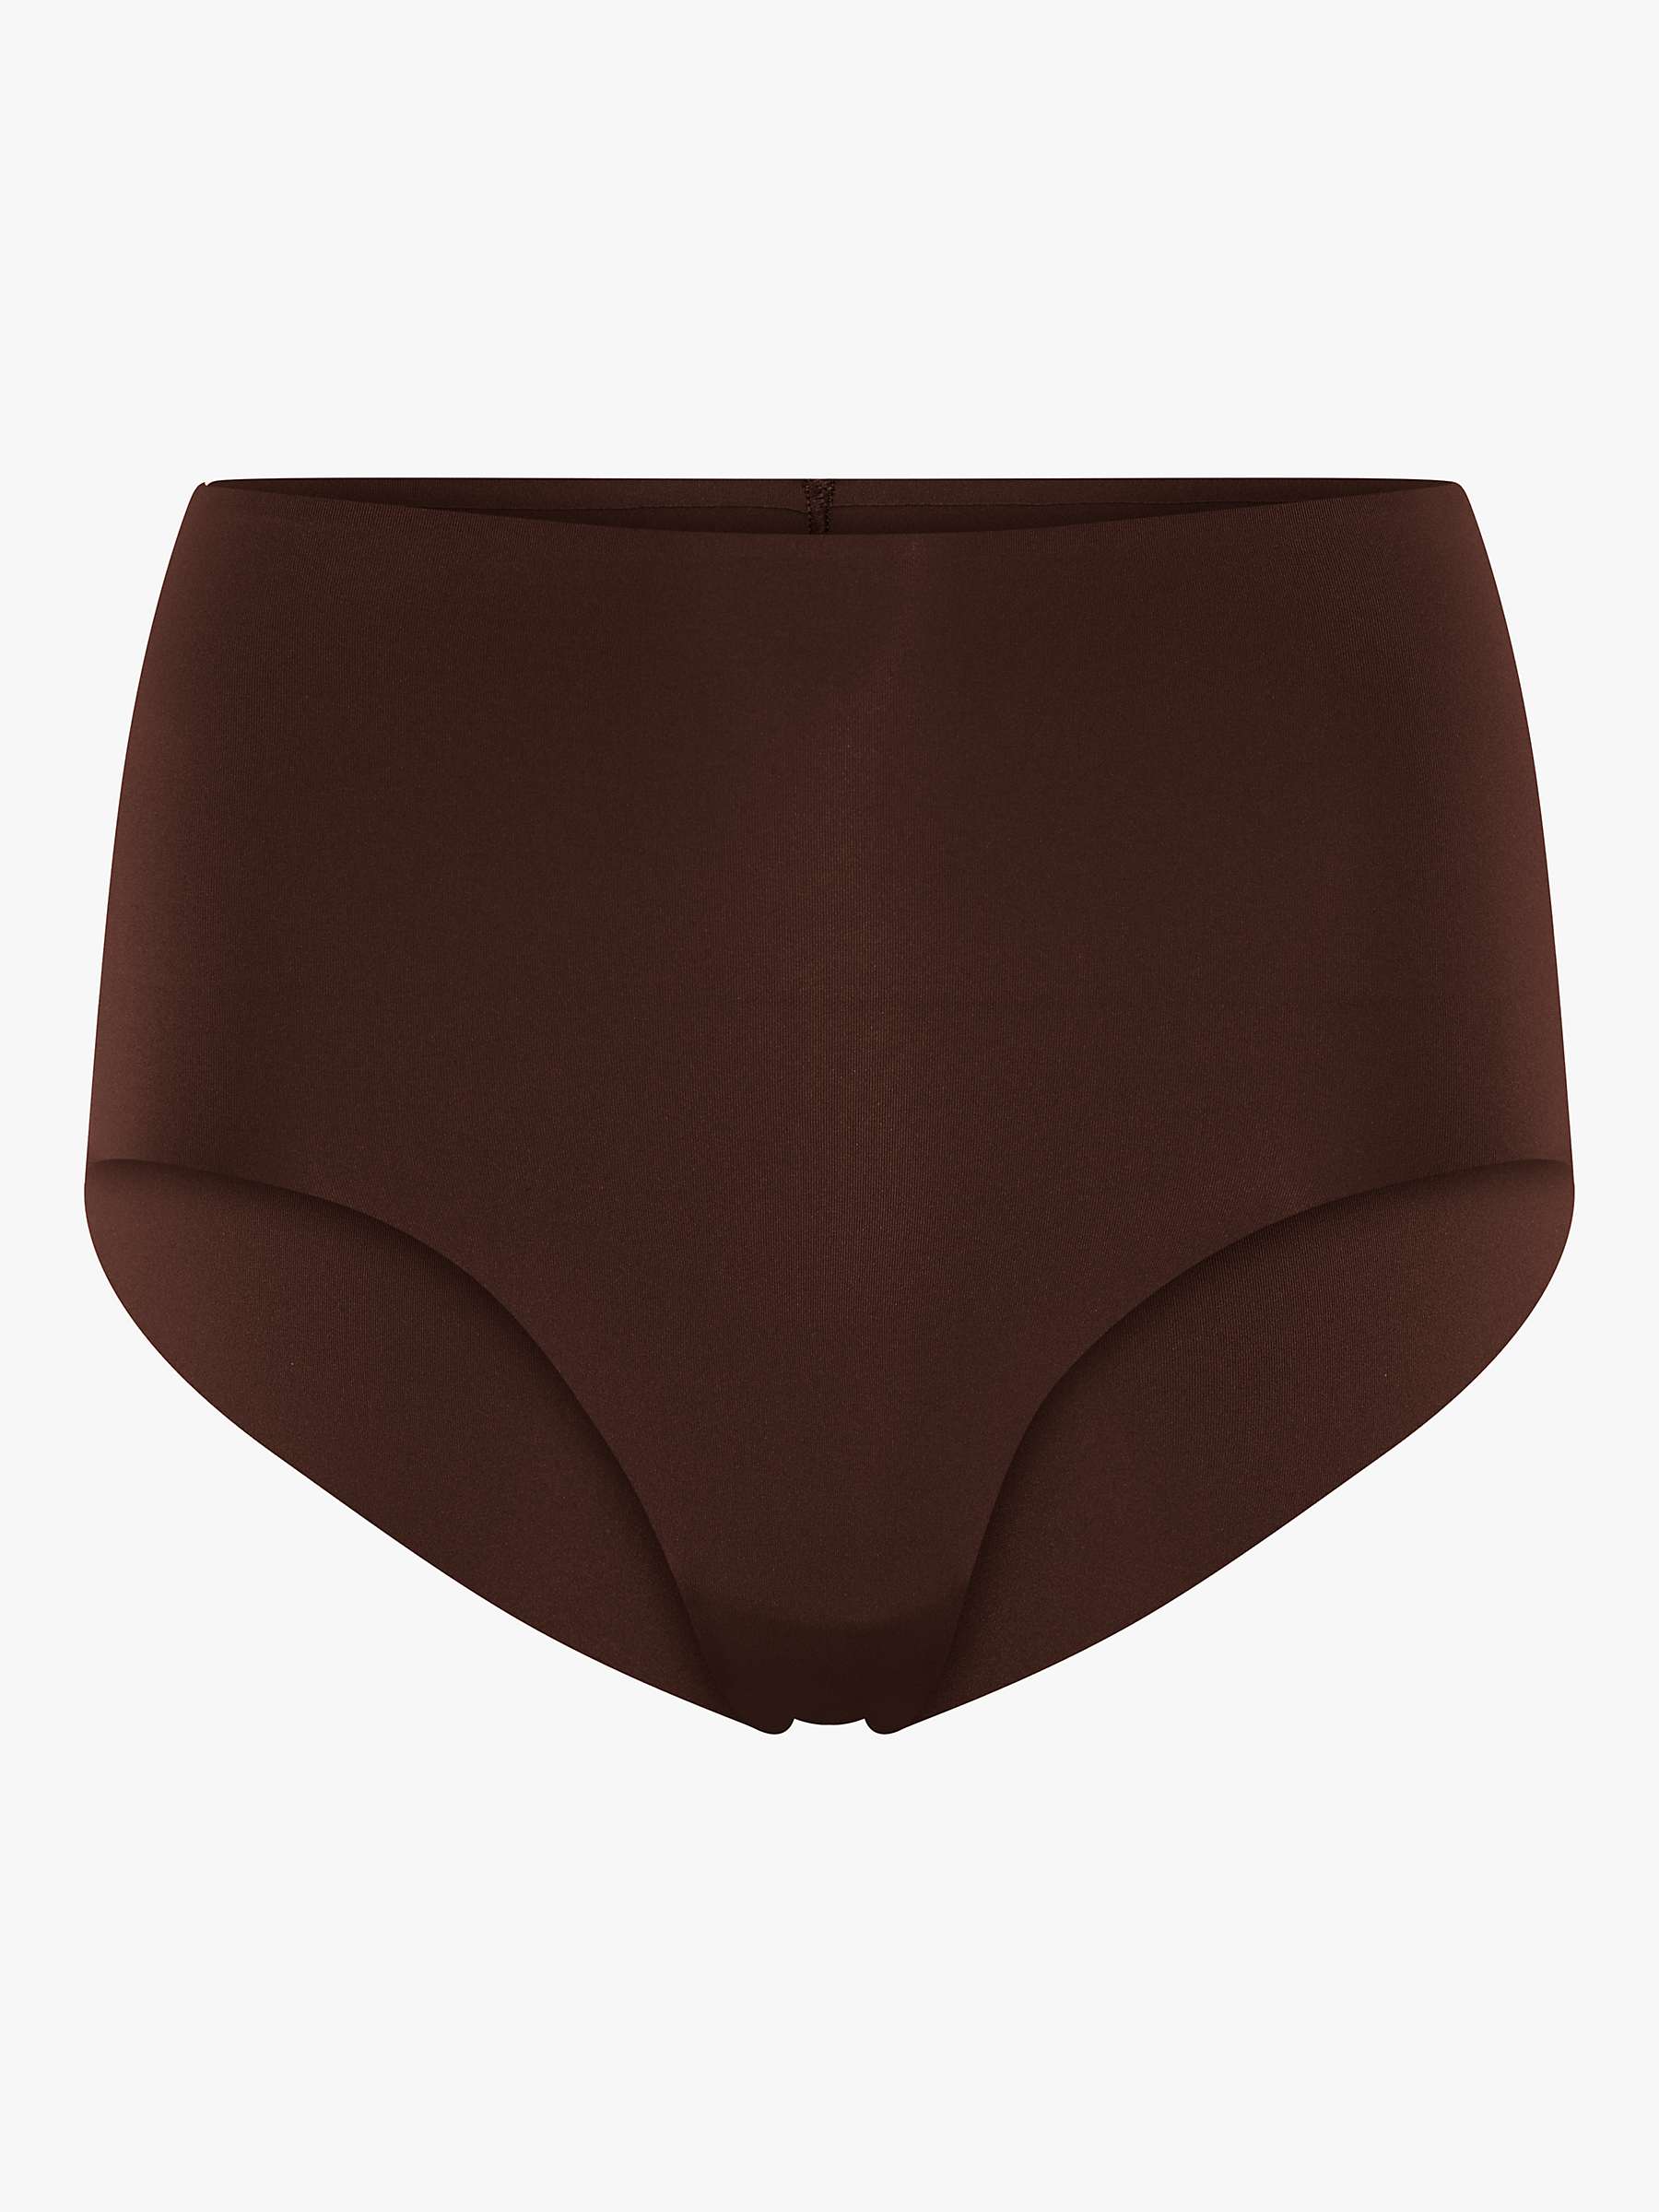 Buy Girlfriend Collective High Rise Plain Sports Knickers Online at johnlewis.com